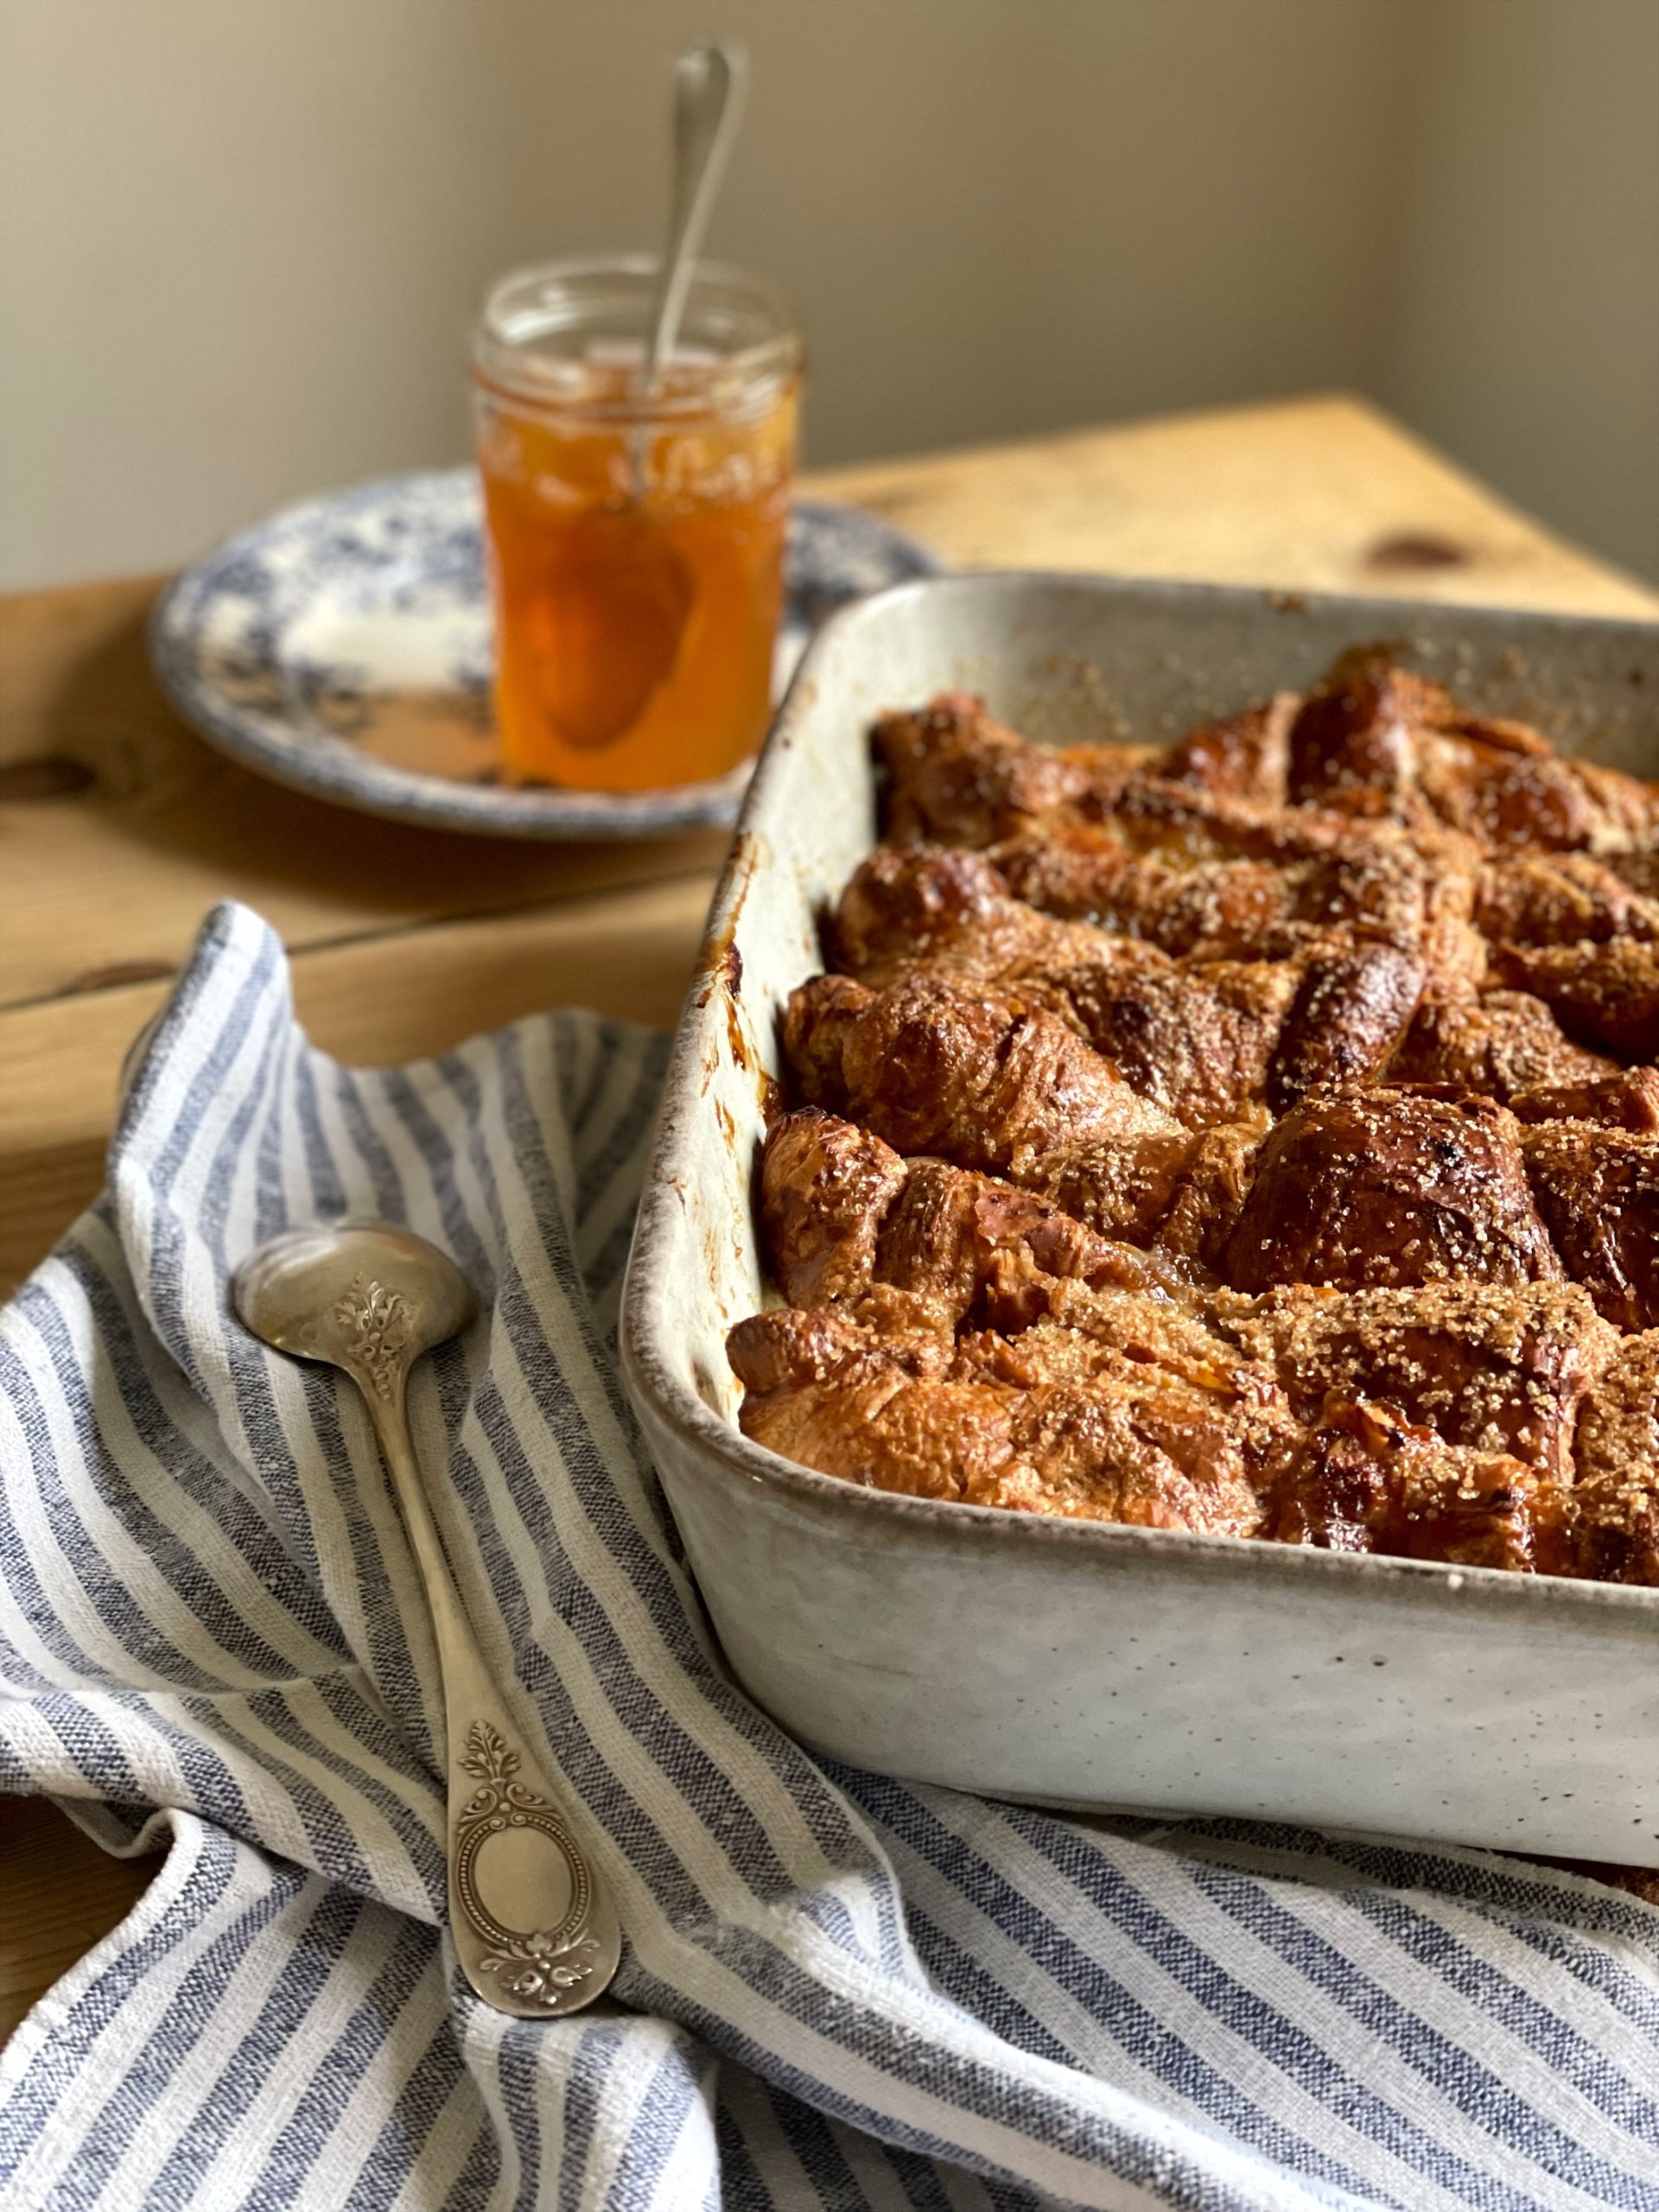 Apricot croissant pudding recipe - a great way to use up leftover croissants